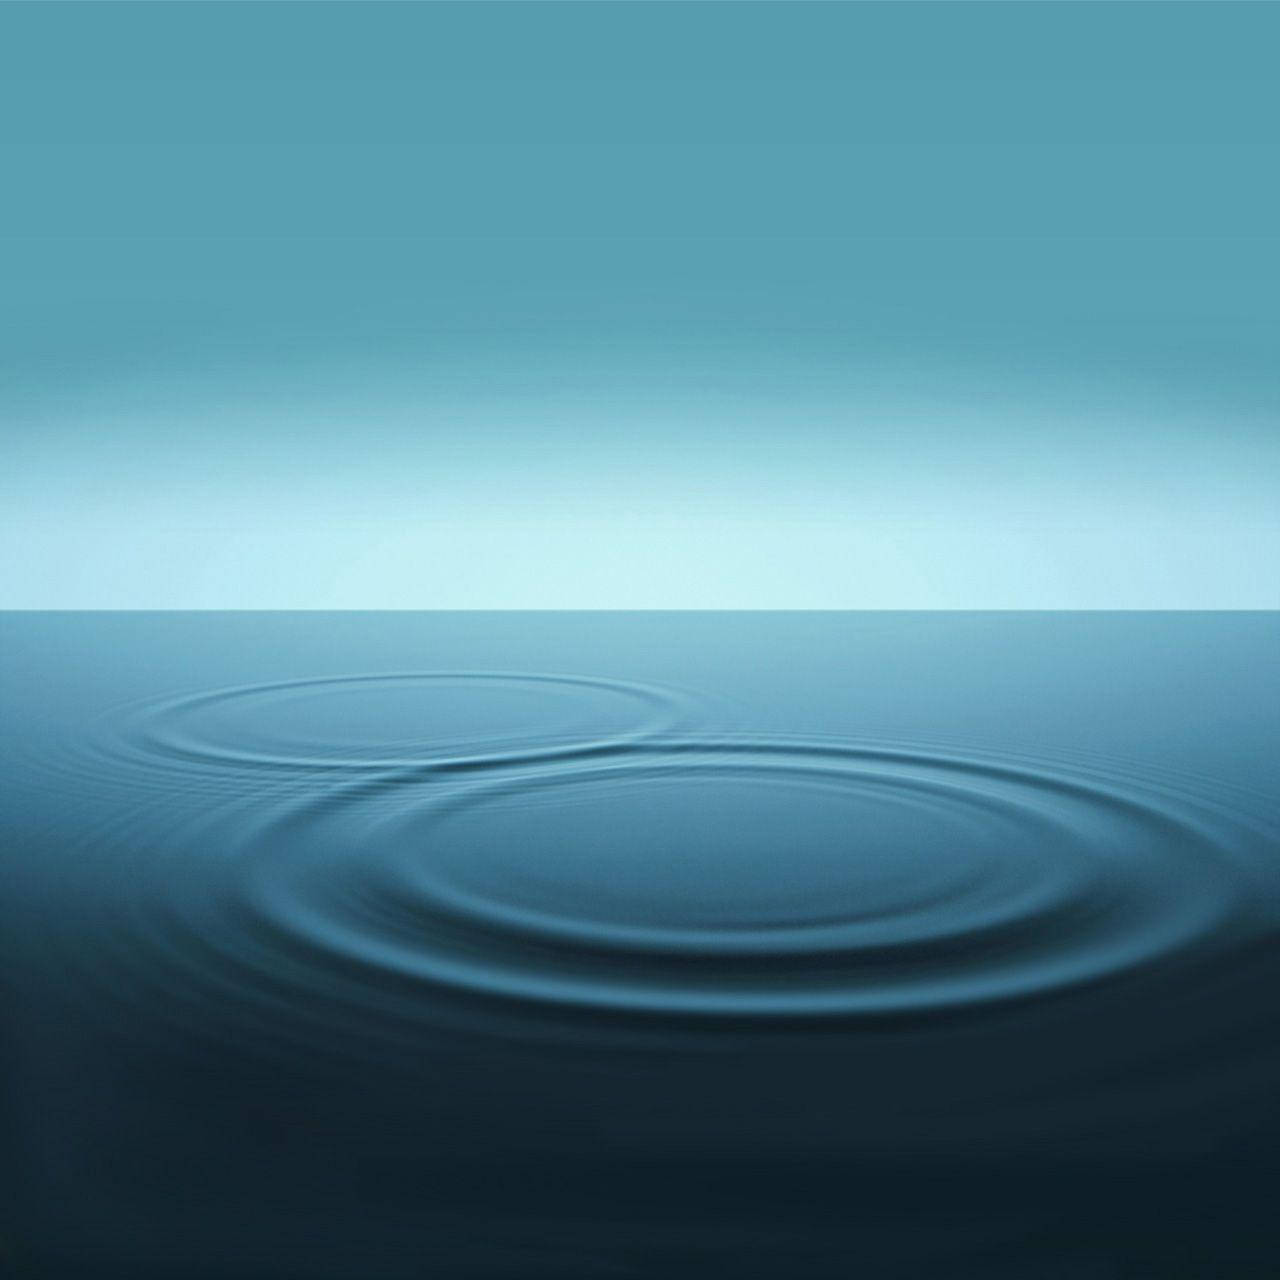 Tranquil Ripples on Water with Galaxy Tablet Wallpaper